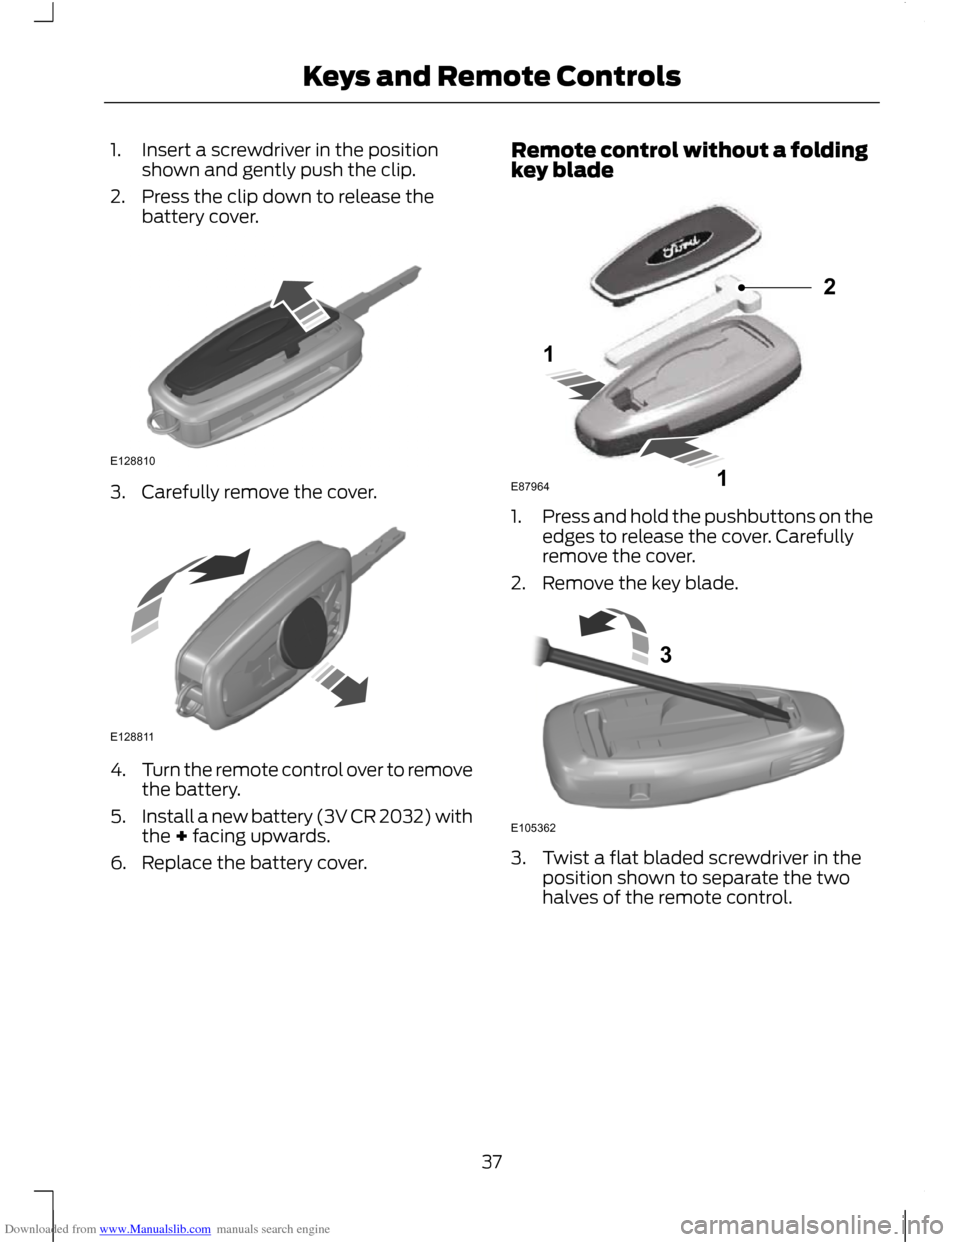 FORD C MAX 2011 2.G Owners Manual Downloaded from www.Manualslib.com manuals search engine 1. Insert a screwdriver in the position
shown and gently push the clip.
2. Press the clip down to release the battery cover. 3. Carefully remov